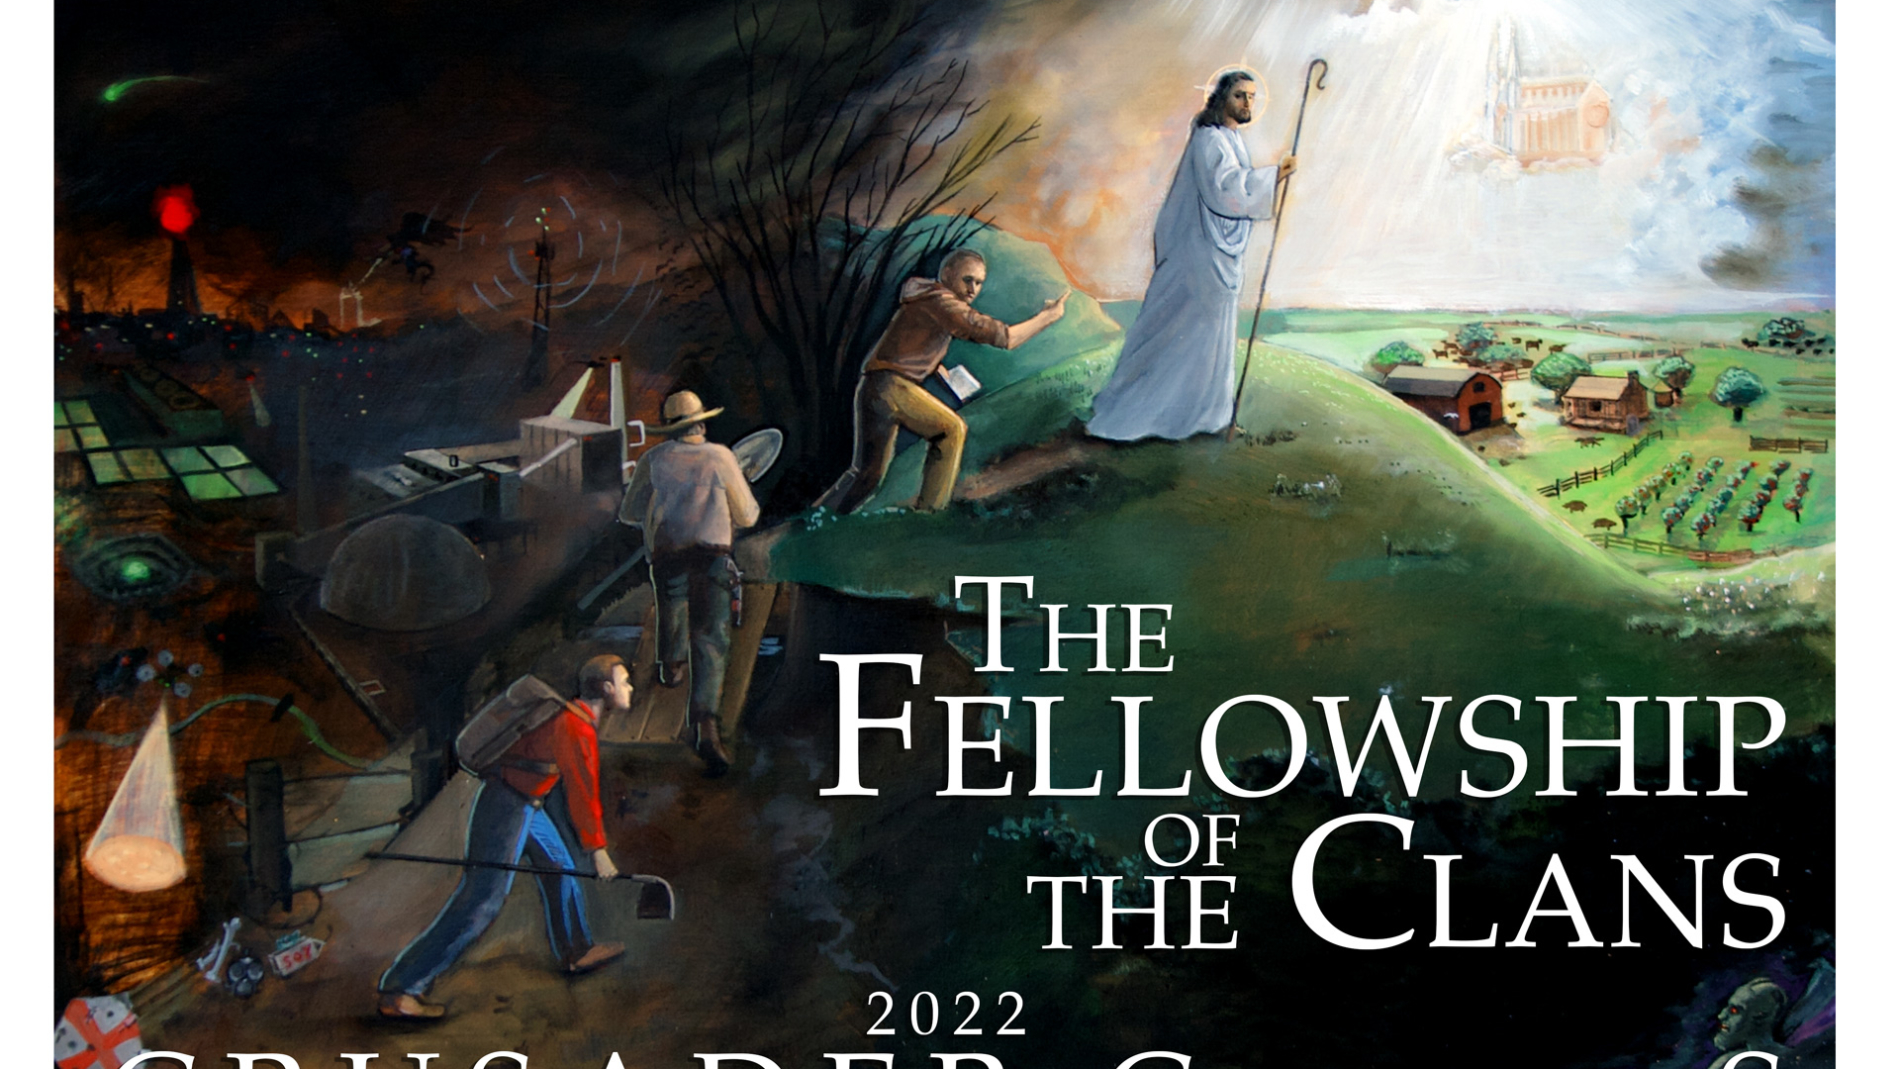 Fellowship_of_The_Clans_2022_Poster_Color_FINAL